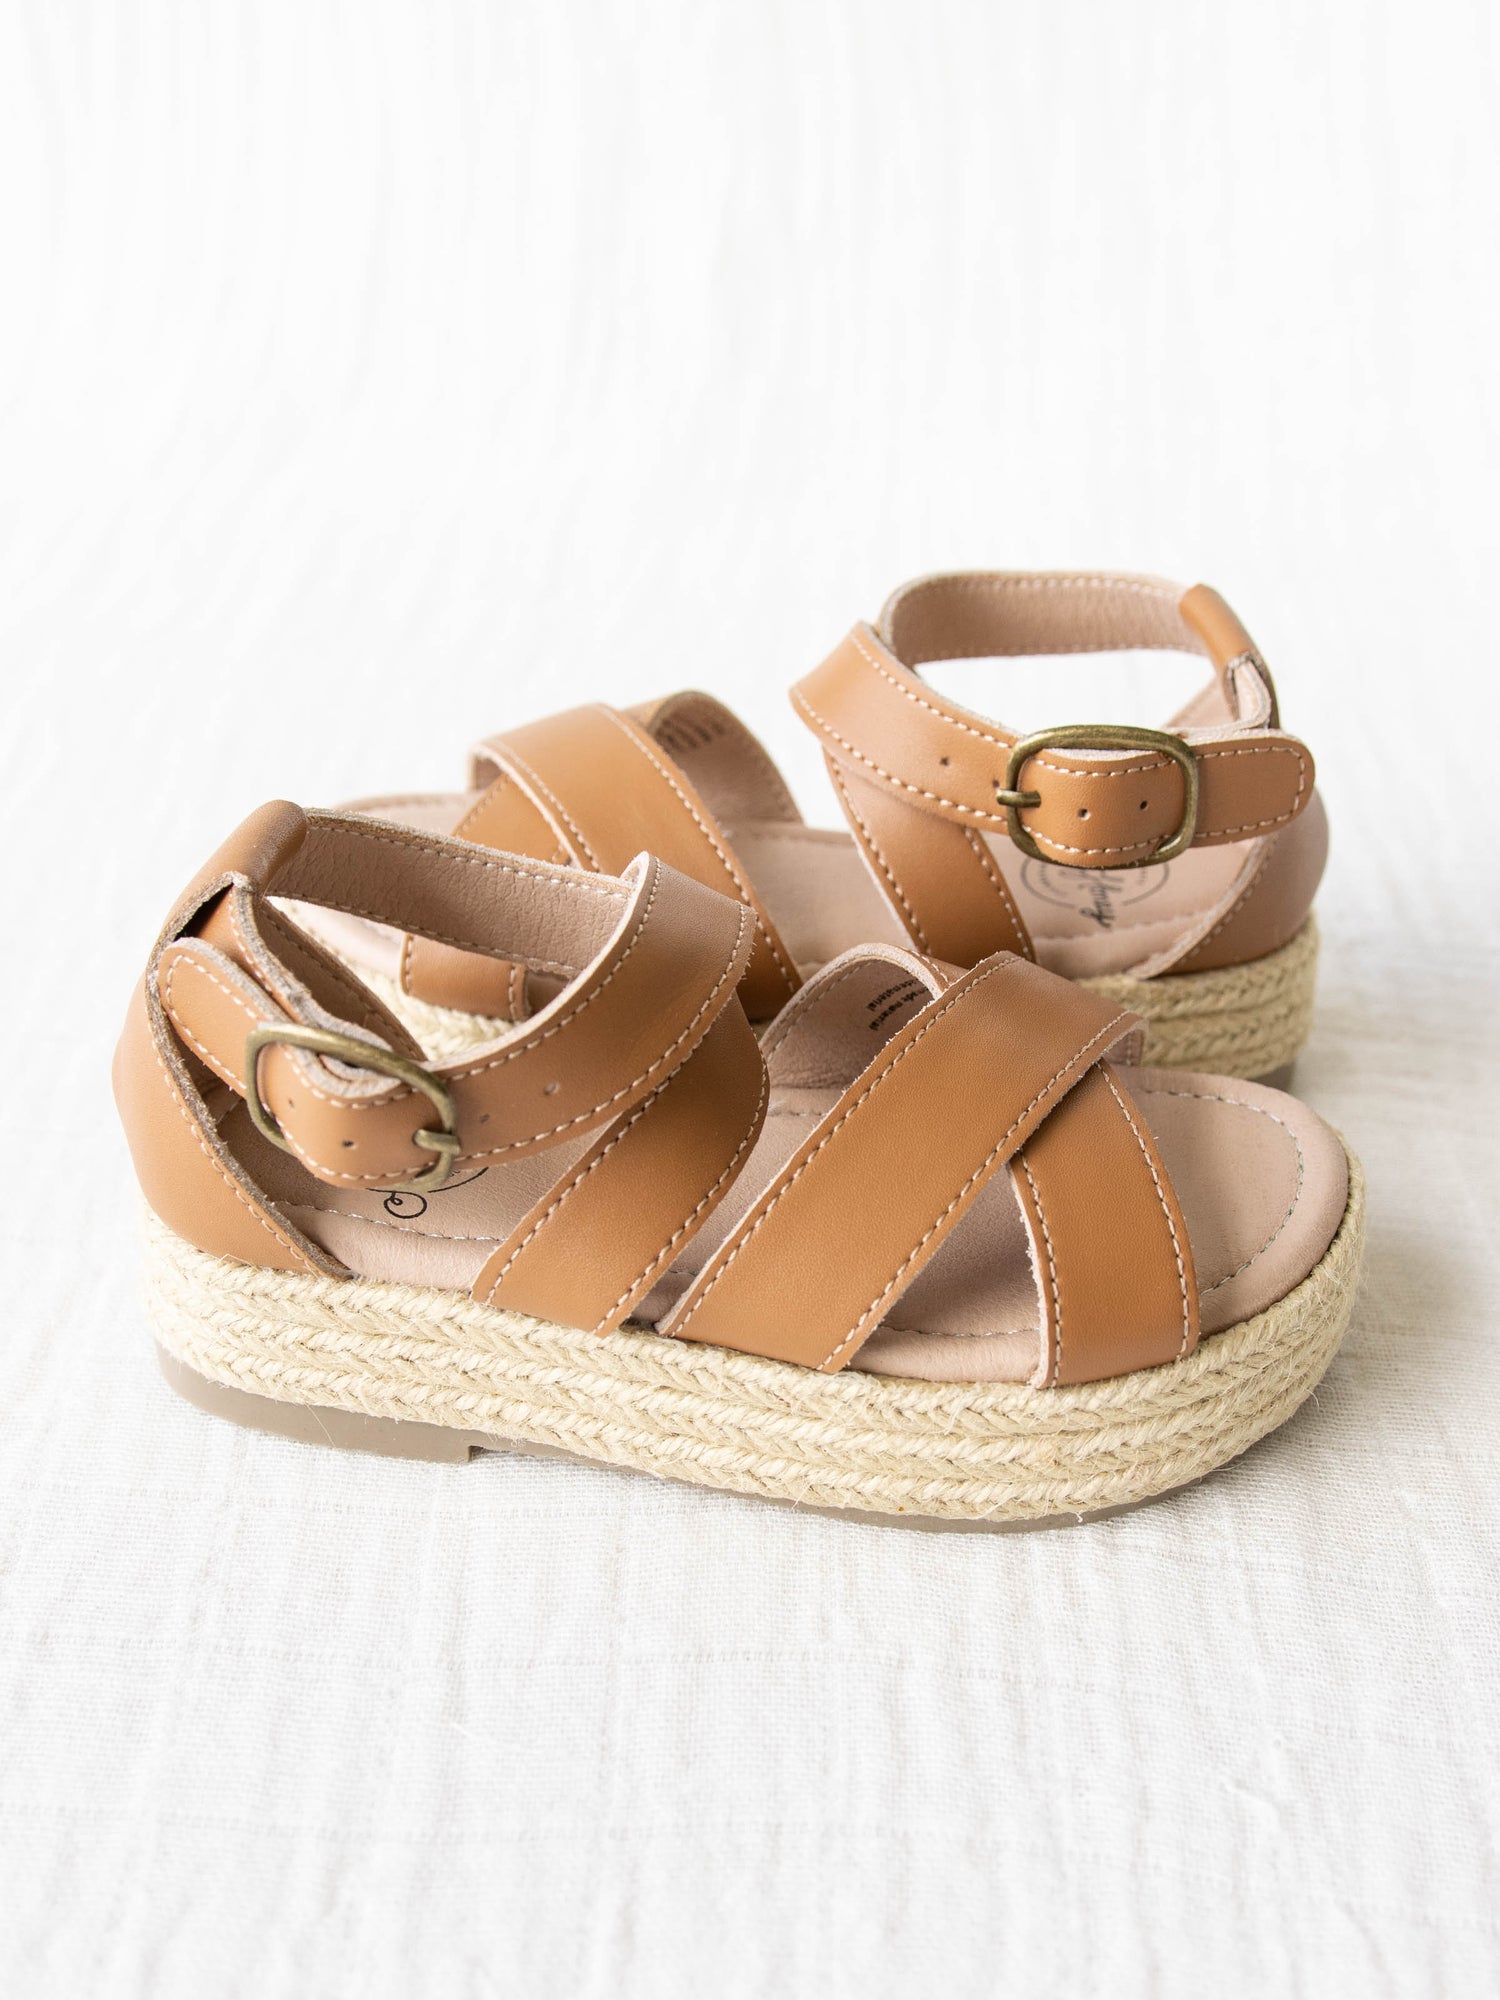 These brown leather Platform Sandals feature a closed back attached to an adjustable strap with metal buckle that wraps around the ankle. With a rubber sole and thick straps over the top of the foot, these sandals are prefect for a day on the go.